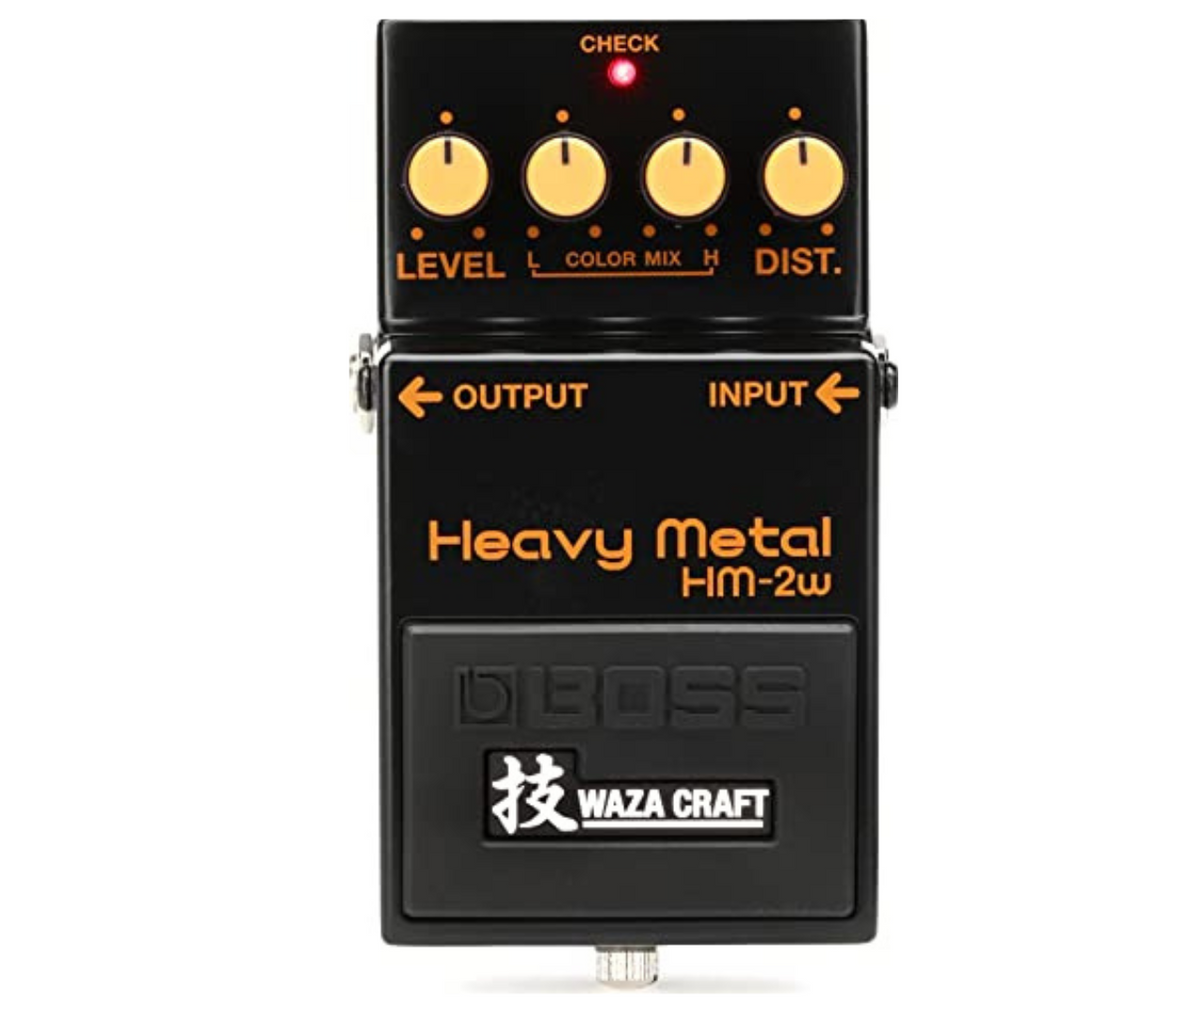 BOSS HM-2W Heavy Metal Best Guitar Effects Pedal Special Edition Waza Craft Pedal Authentic Analog Sound